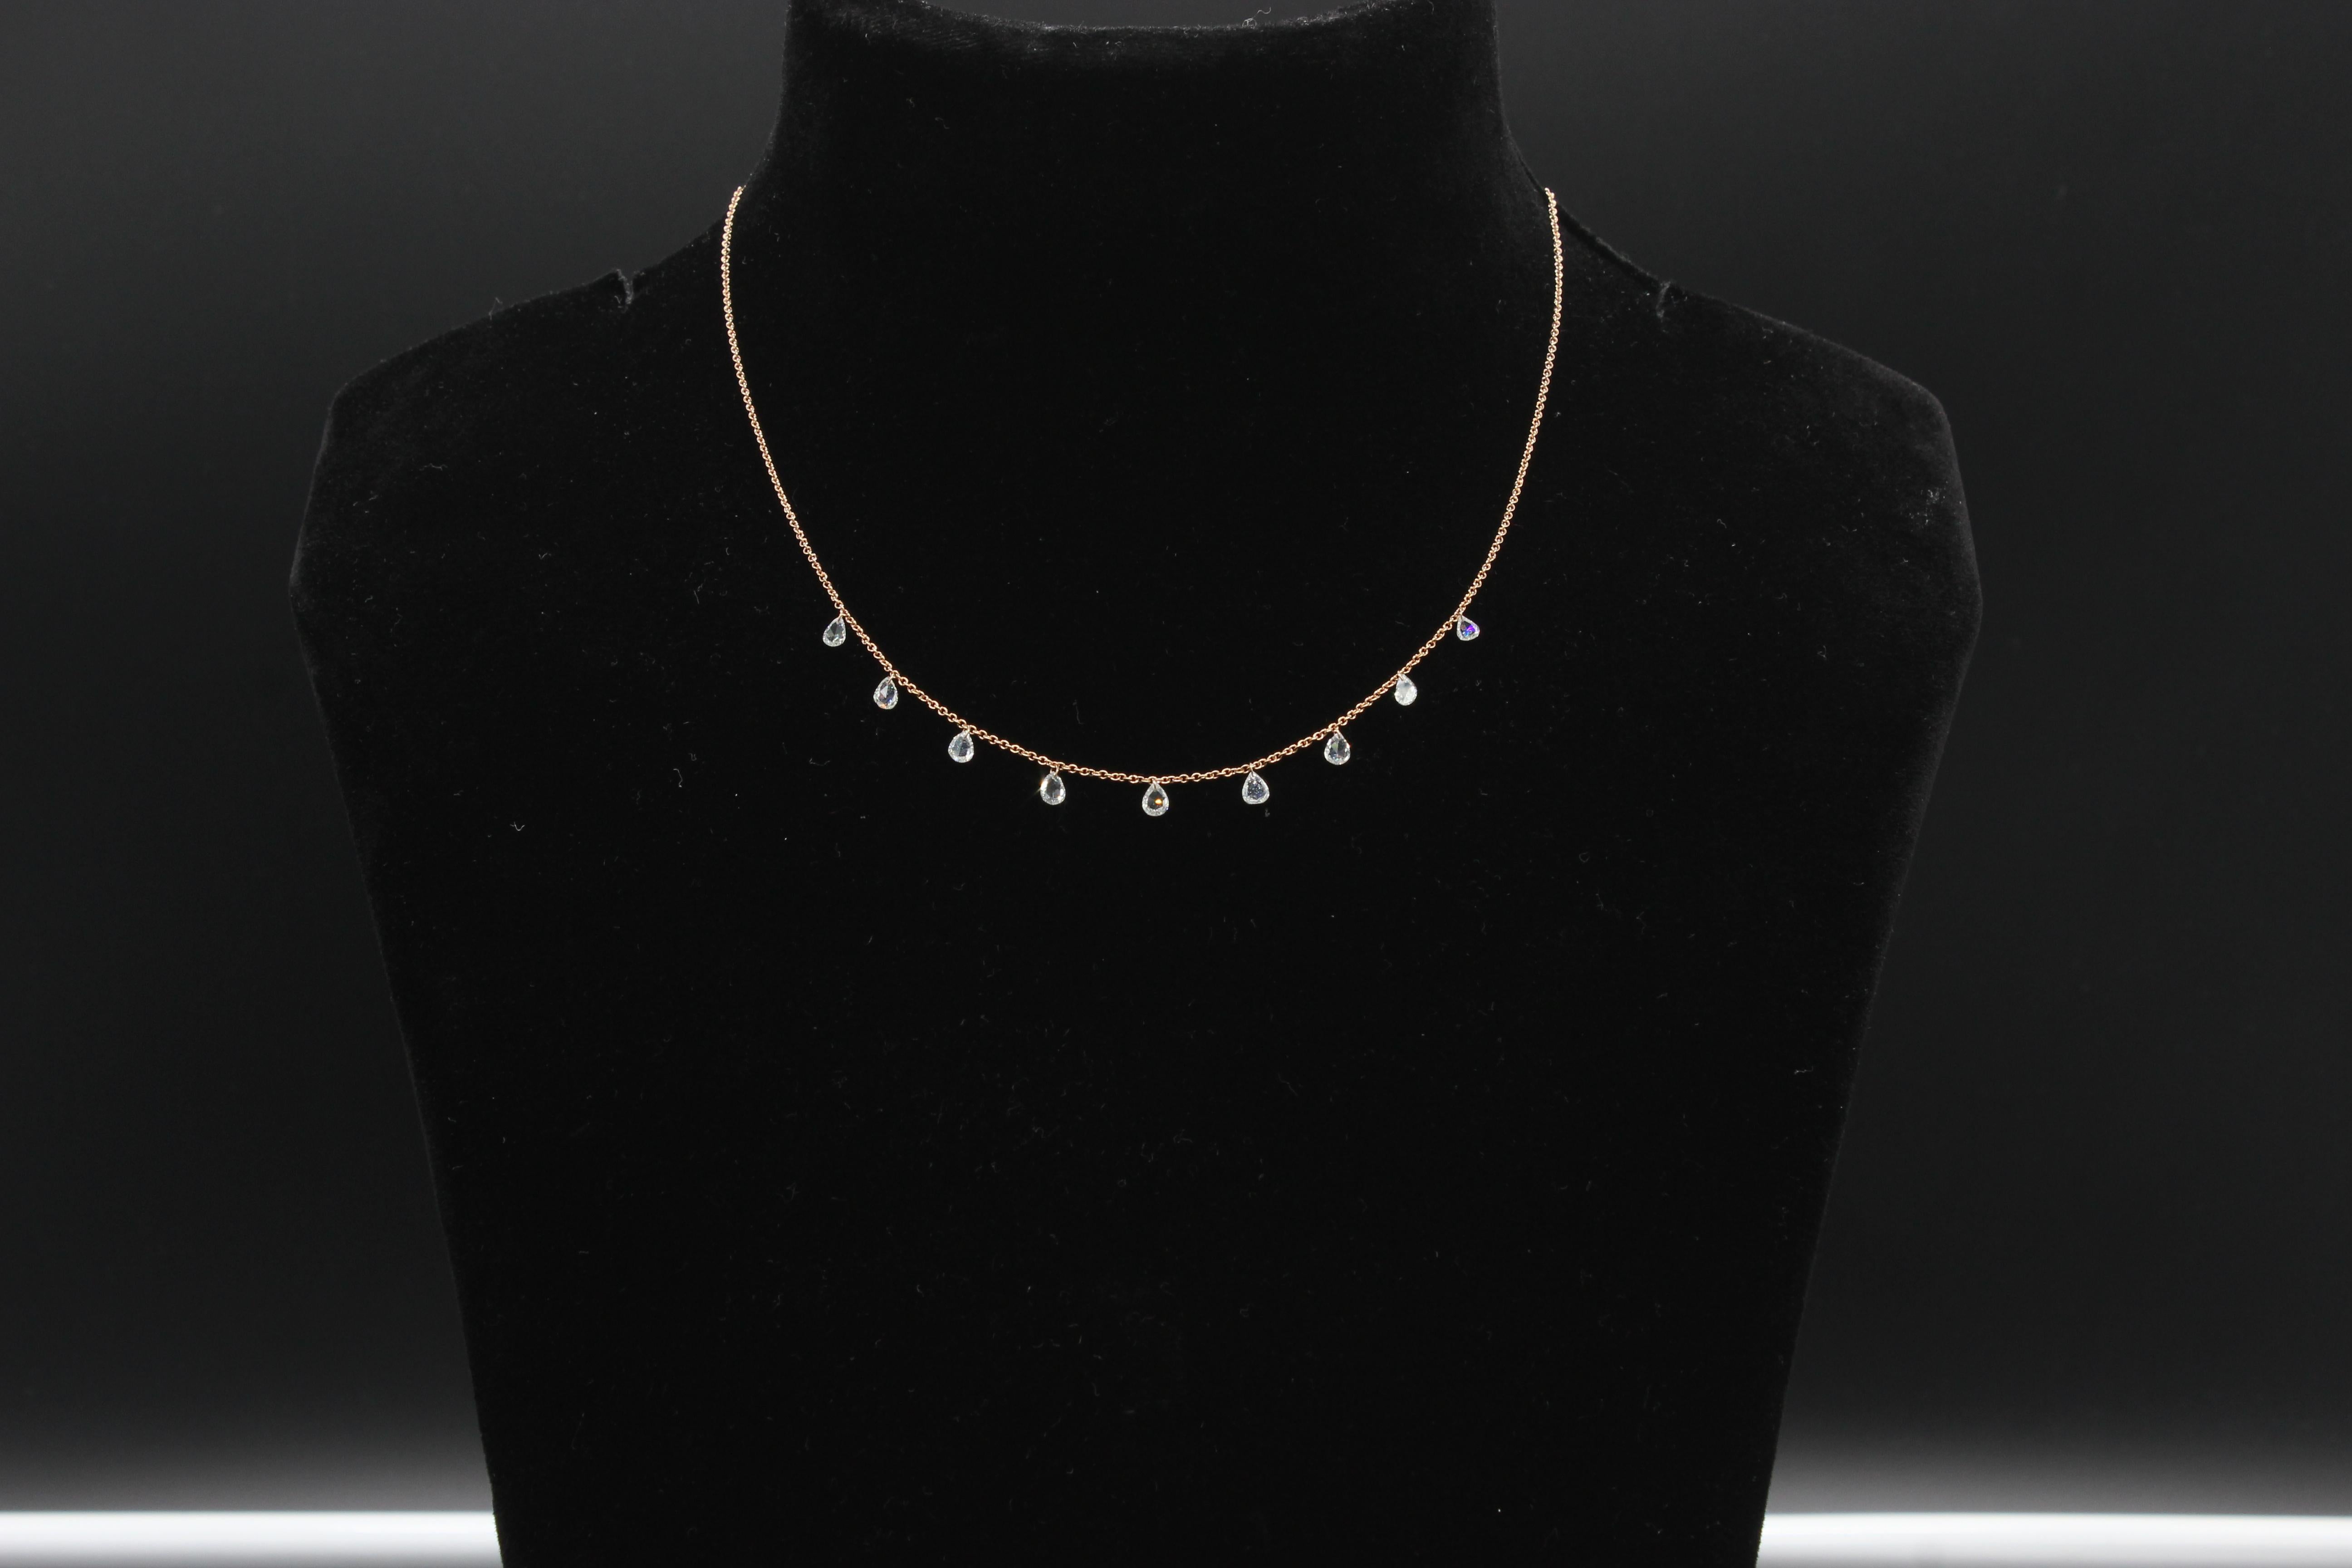 PANIM Mille Etoiles 9 Pear Diamond Rosecut 18K Rose Gold Necklace

This necklace features 9 Pear Shaped white diamond Rose cut spaced evenly apart from each other. They have been pierced and hung from the chain with an almost invisible gold loop.